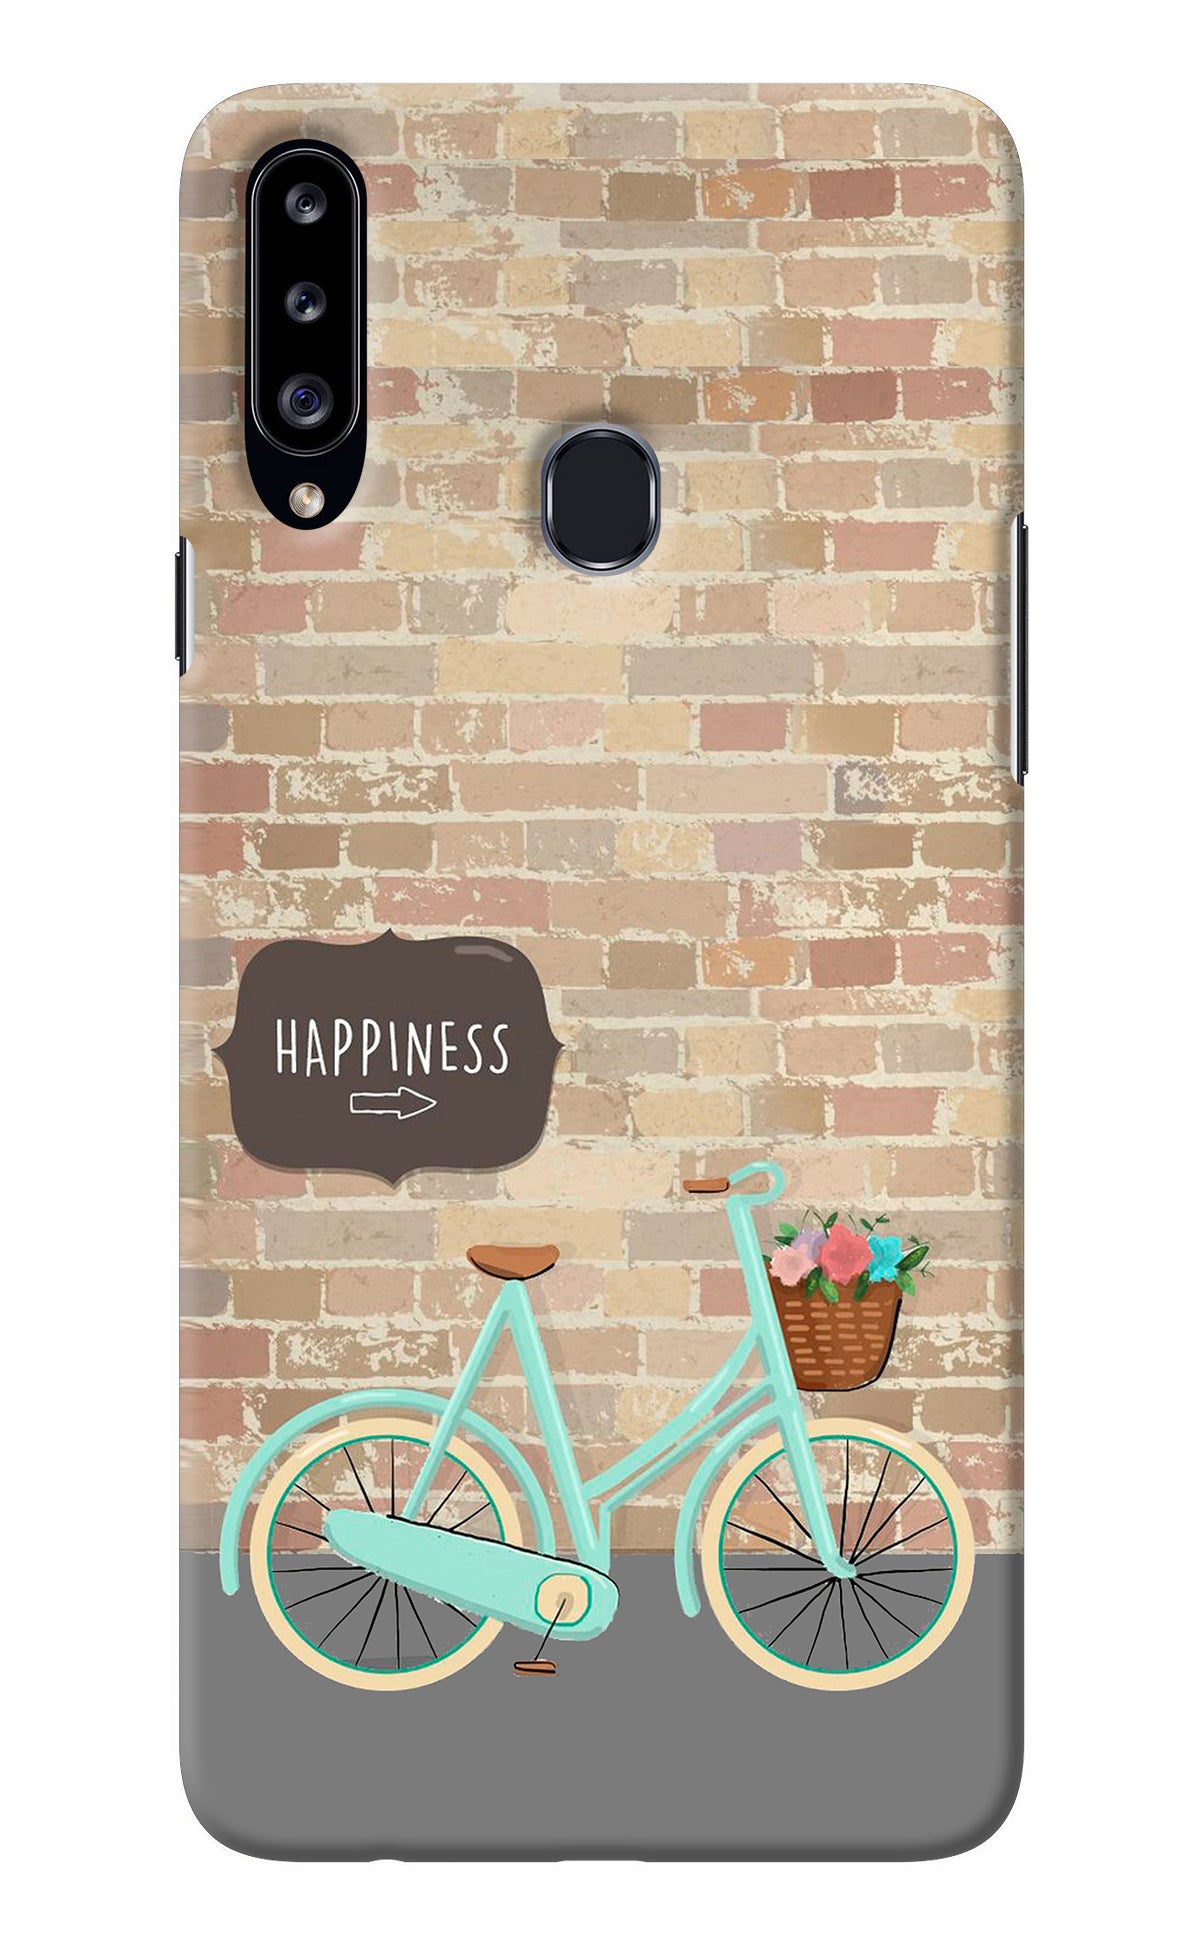 Happiness Artwork Samsung A20s Back Cover